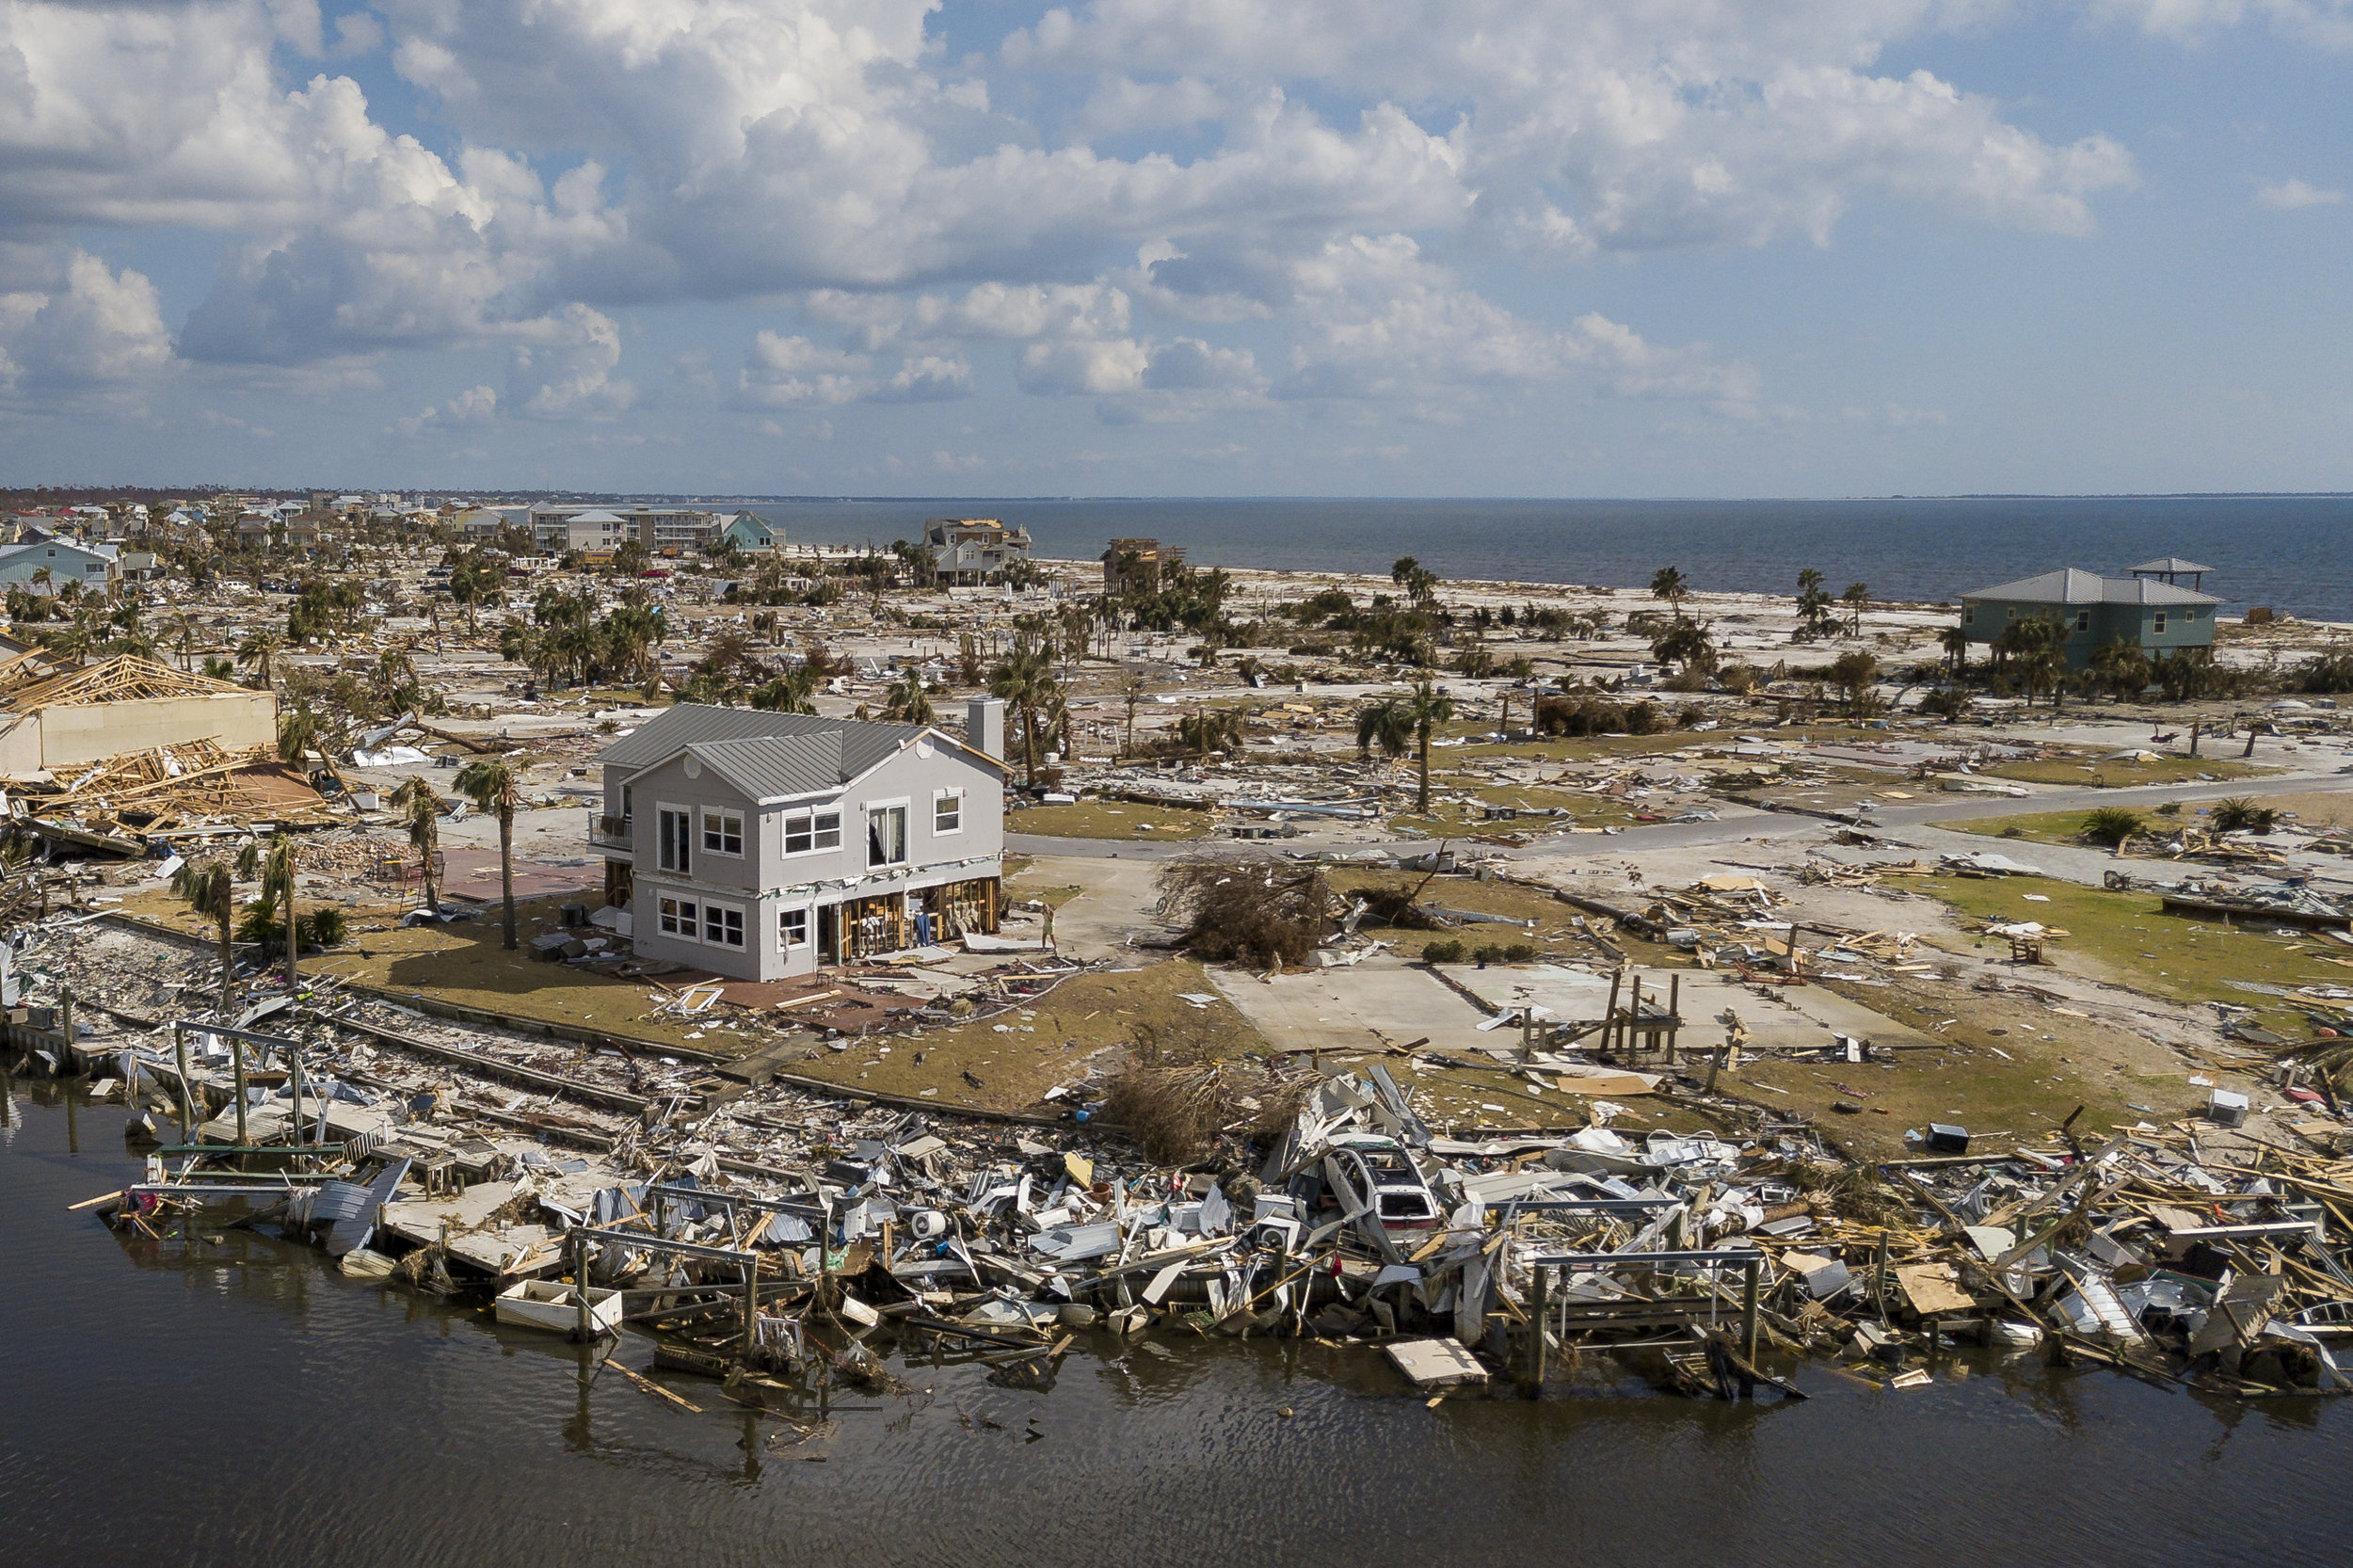  Aerial view of rubble and structural damage in Mexico Beach, Florida on Friday, October, 19, 2018. Hurricane Michael devastated the Florida Panhandle leaving tens of thousands without food, power or shelter. 